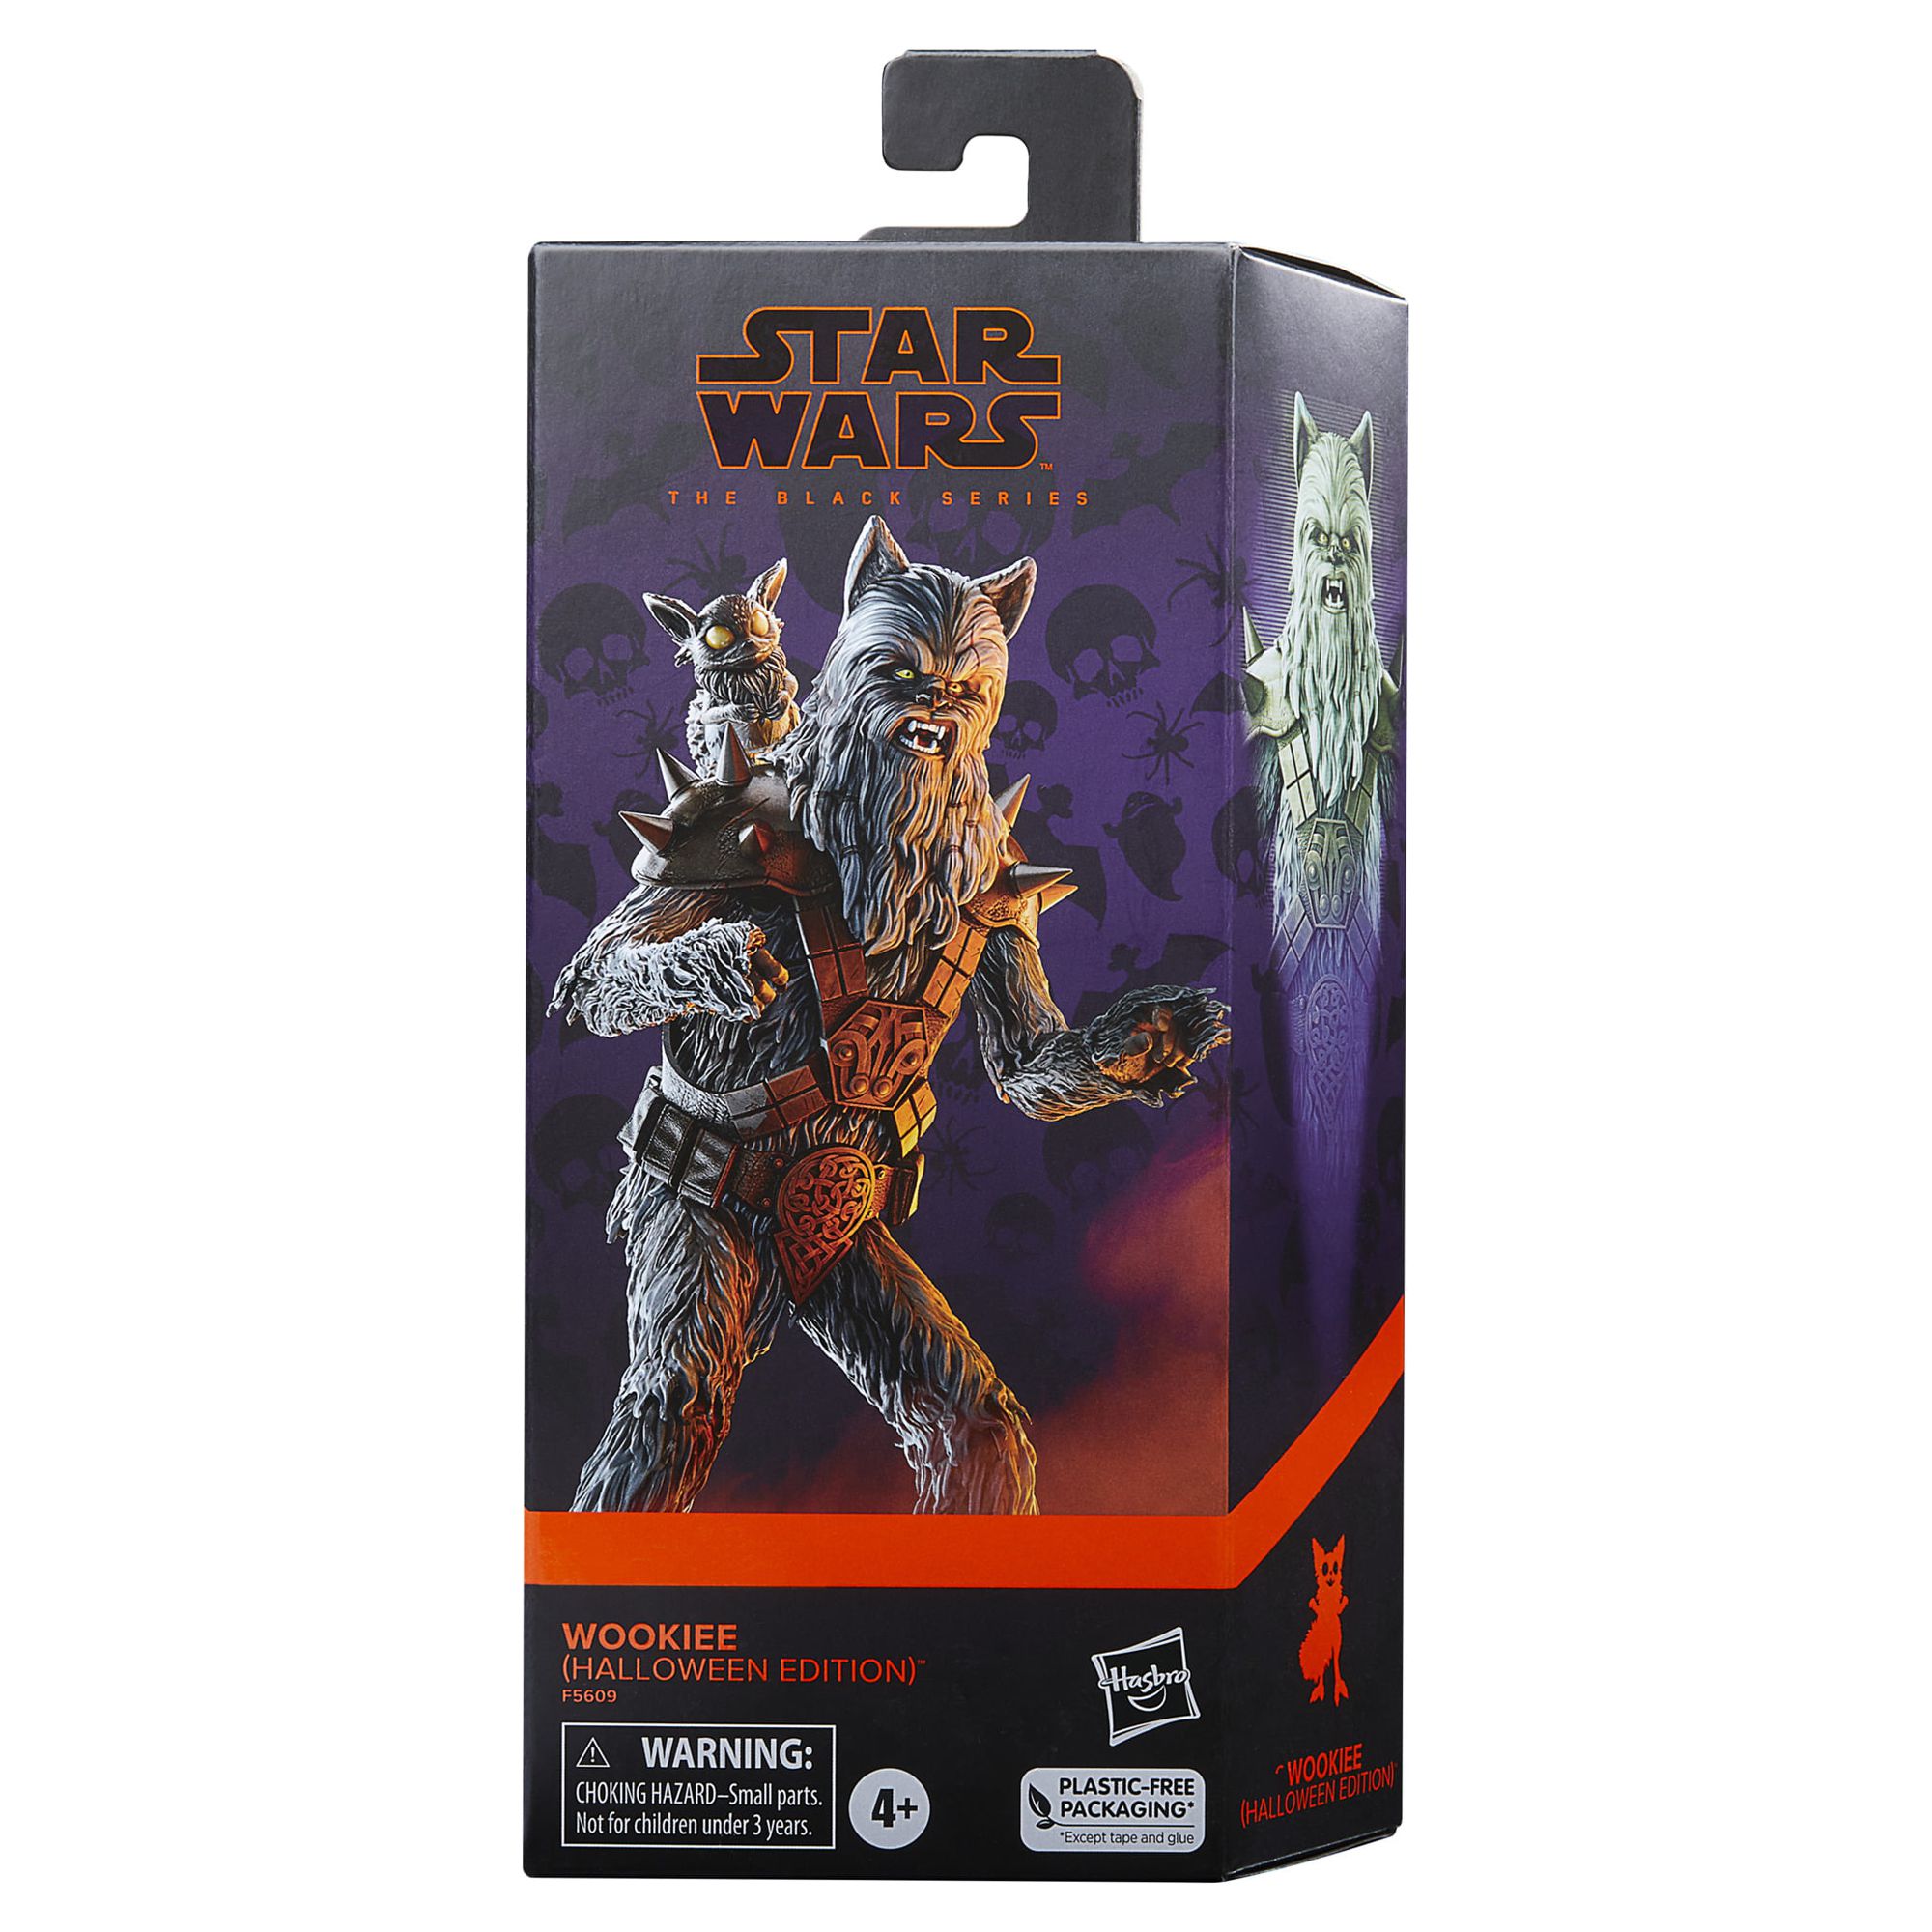 Star Wars: The Black Series Wookiee Halloween Bucket Edition Kids Toy Action Figure for Boys and Girls Ages 4 5 6 7 8 and Up (6”) - image 2 of 7